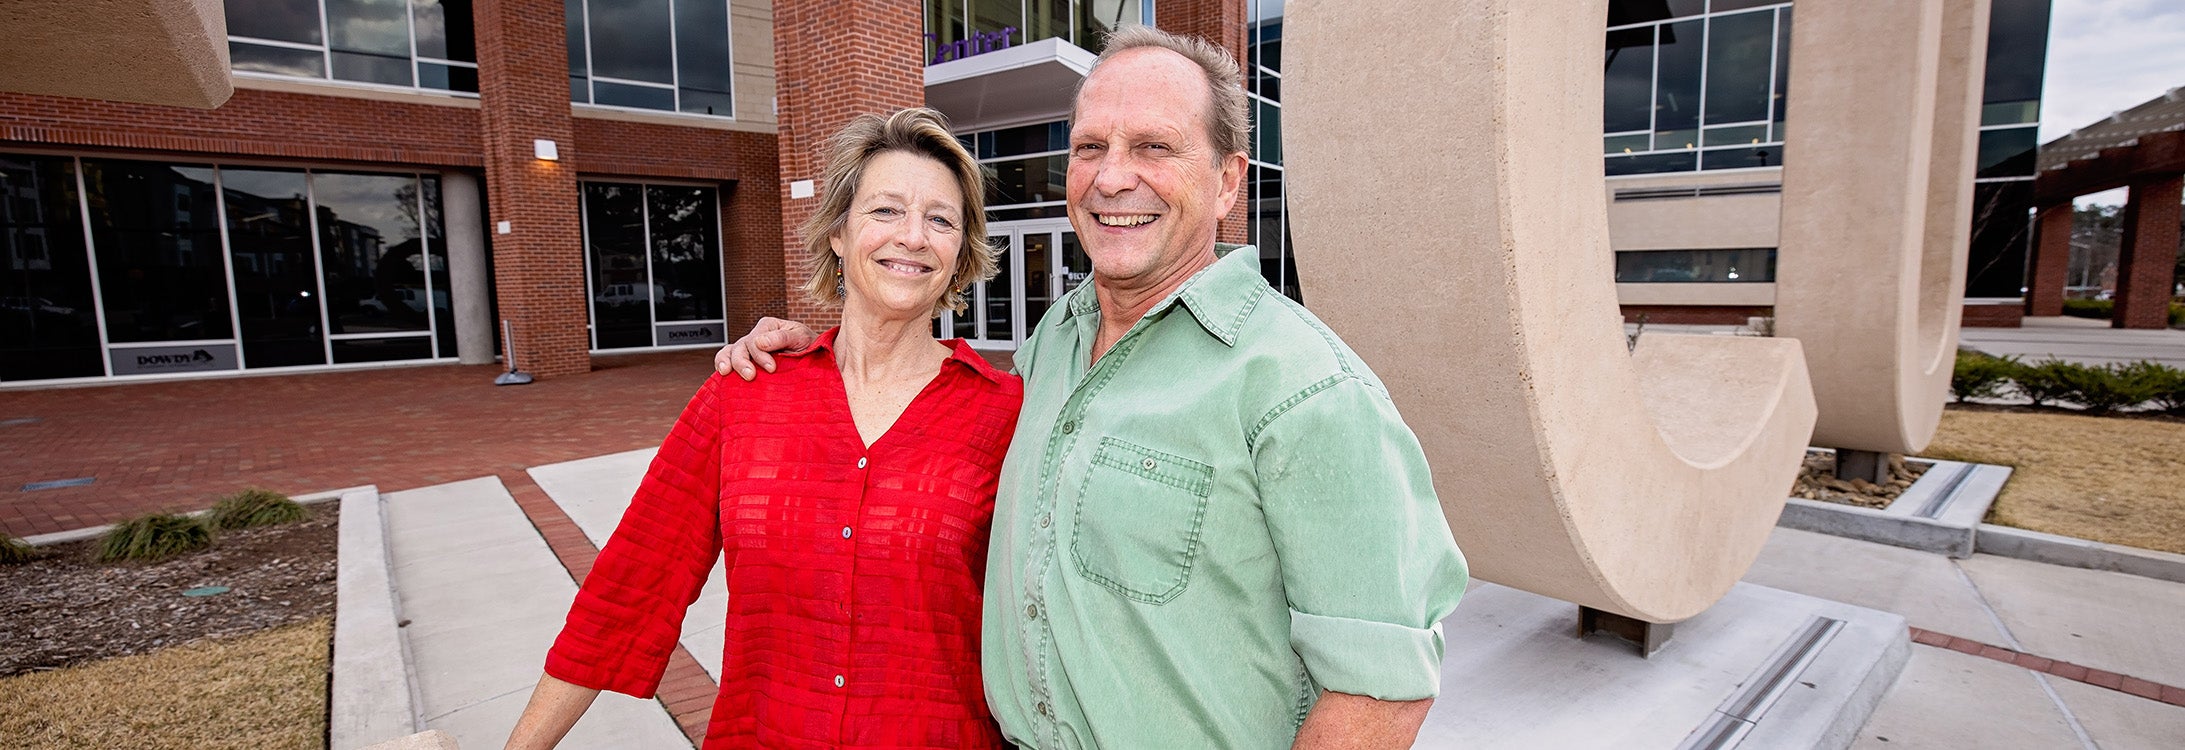 The Harrises’ love story started before they arrived at ECU as graduate students, but it brought them back to campus as professors 20 years after they graduated.<br>(Photo by Cliff Hollis)